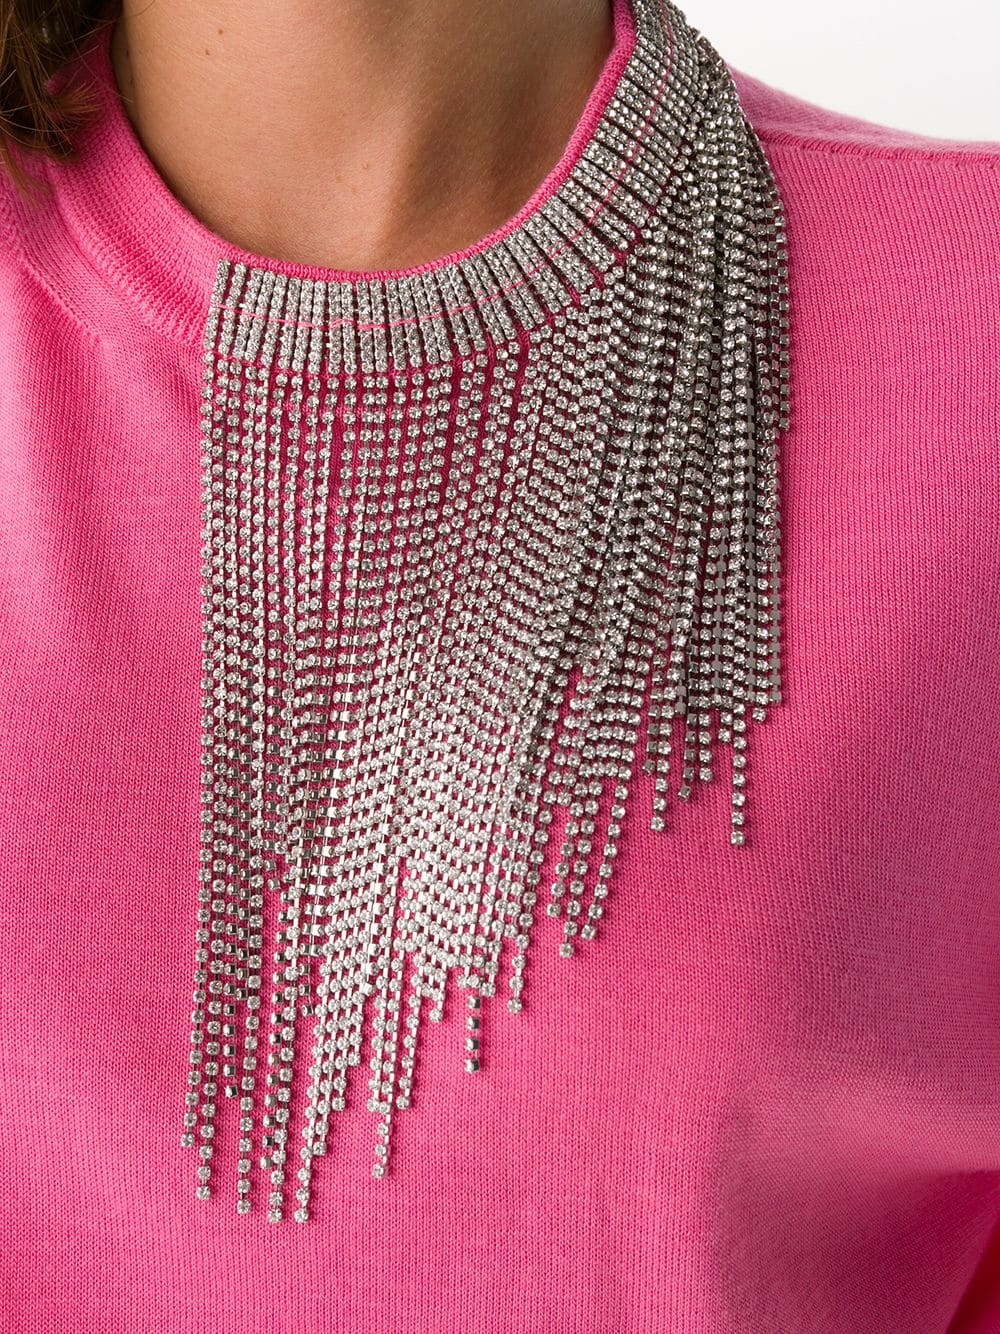 Pink Fringed Sweater